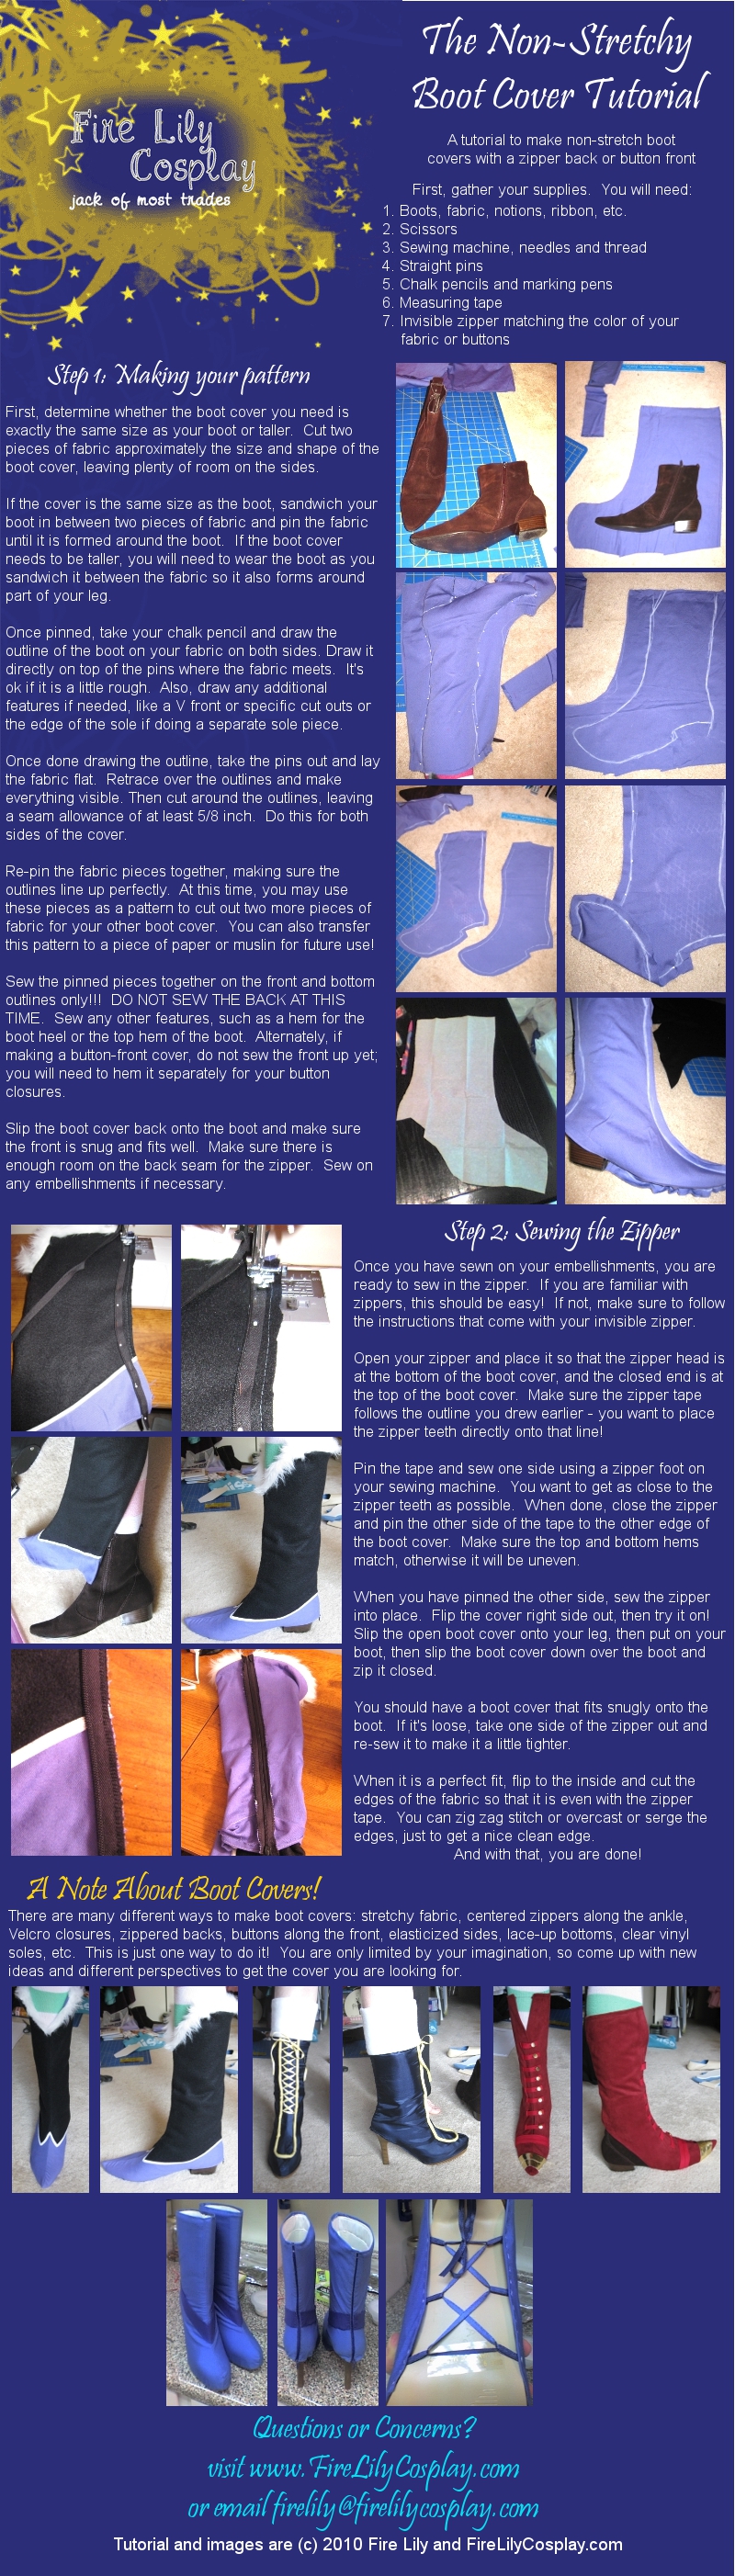 No-Stretch Boot Cover Tutorial by FireLilyCosplay on DeviantArt